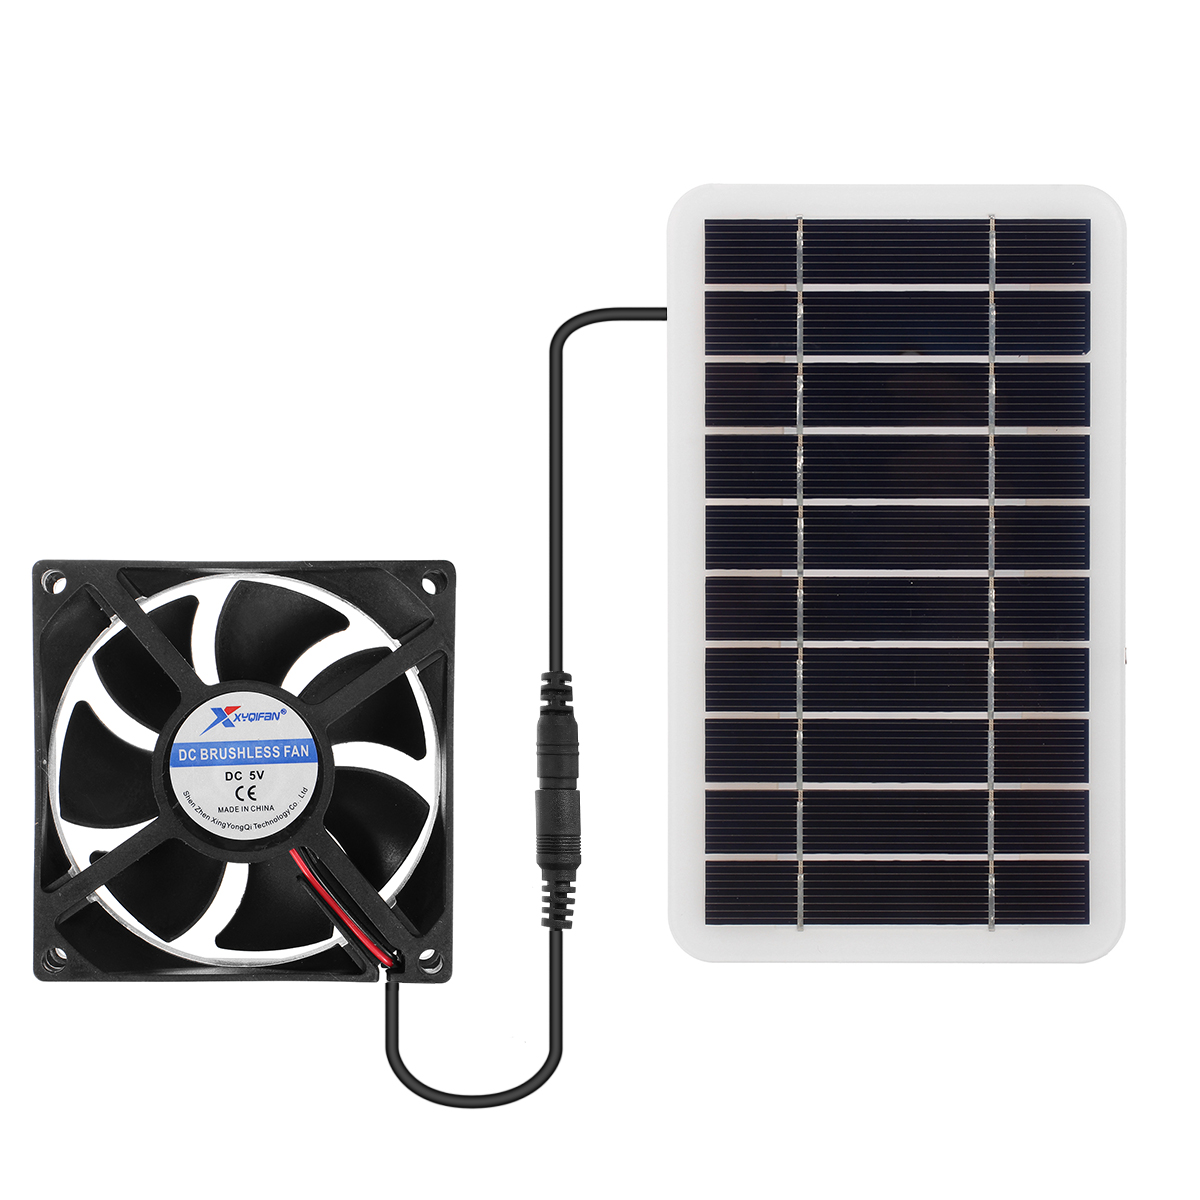 100W-Portable-Solar-Panel-Kit-Dual-DC-5V-USB-Charger-Kit-Solar-Power-Controller-with-Fans-1905897-11